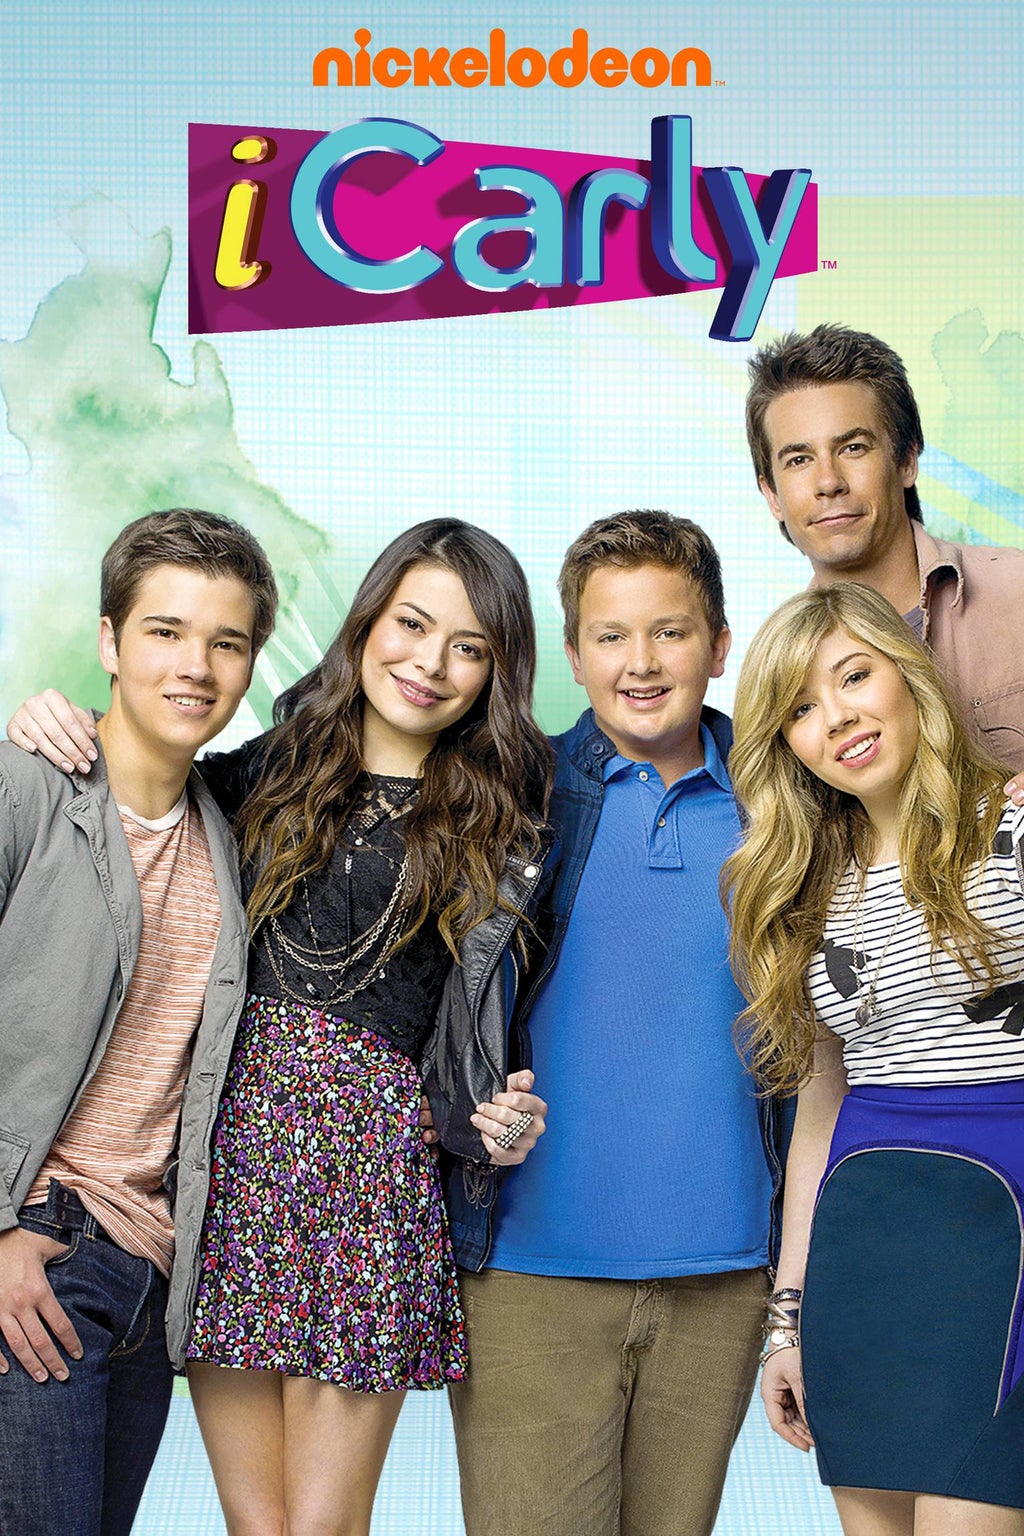 Icarly tv show poster